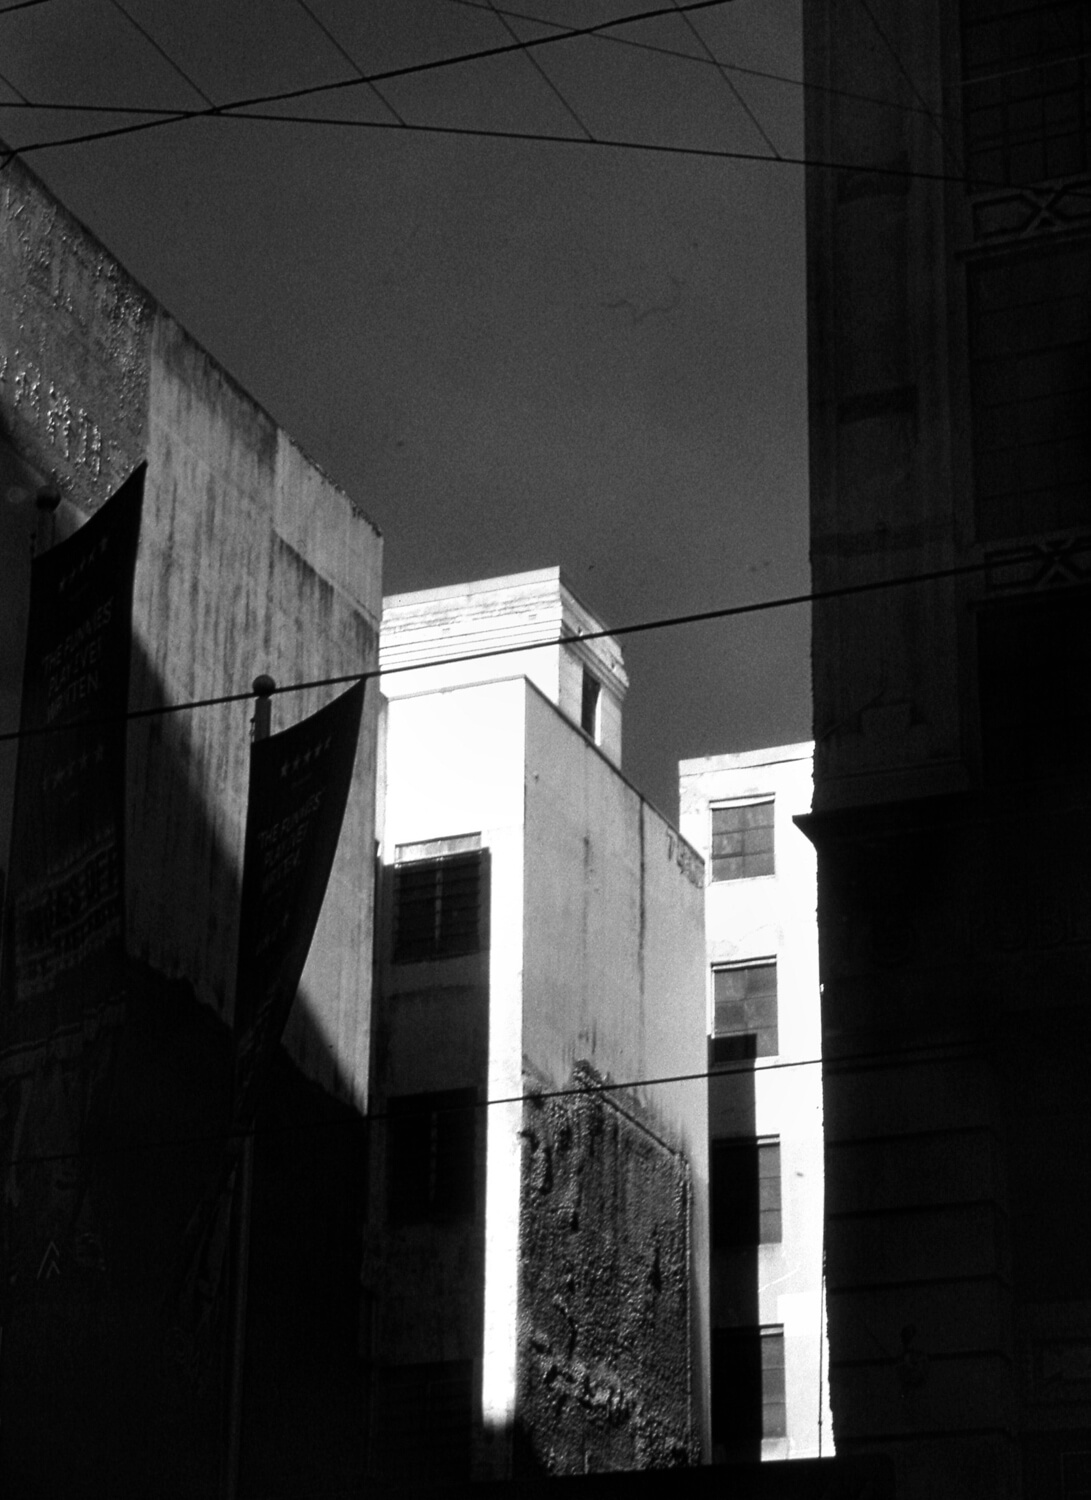 Melbourne City. Winter. Contax G2. ILFORD FP4 PLUS (reversal developed)